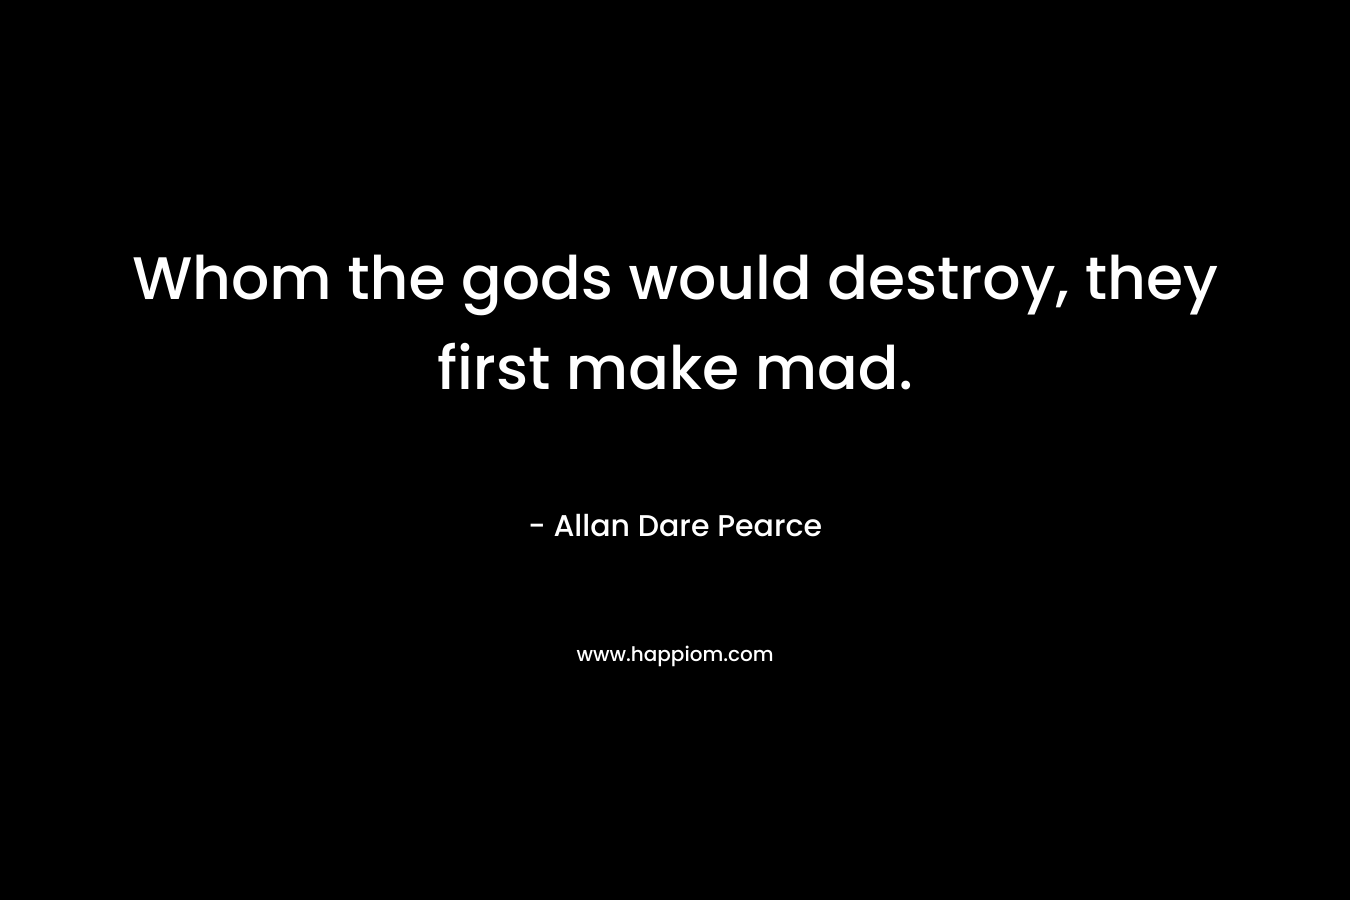 Whom the gods would destroy, they first make mad. – Allan Dare Pearce